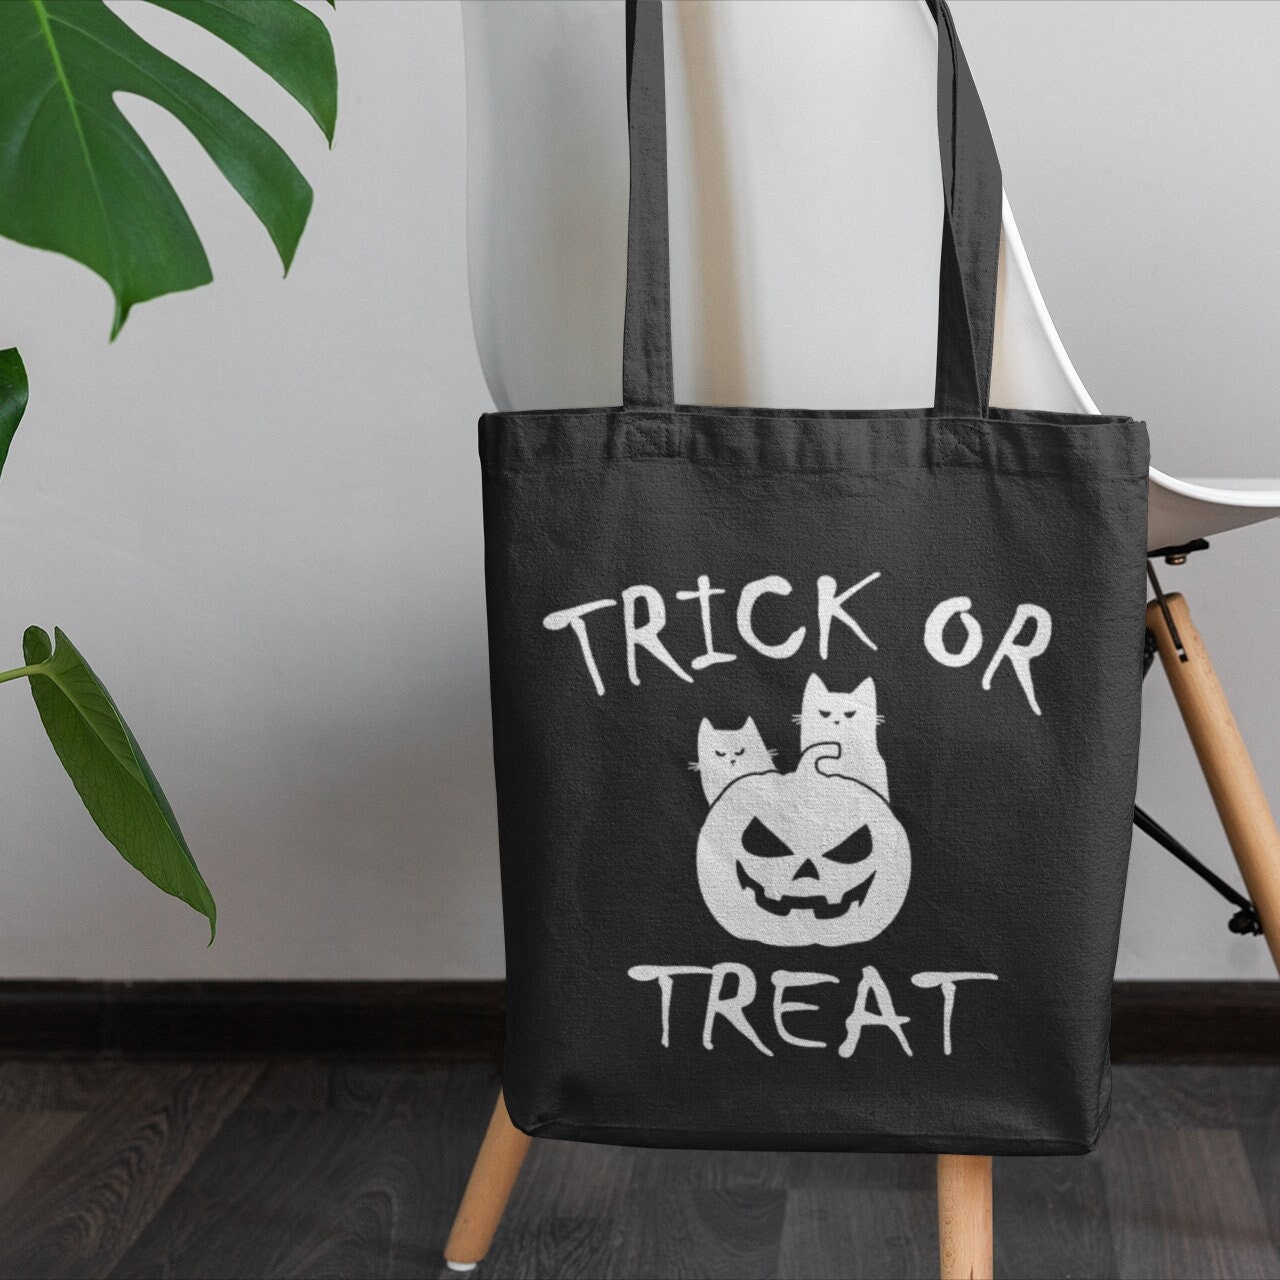 NEW Marshalls Shopping Bag Halloween Trick or Treat Costumes Reusable Tote